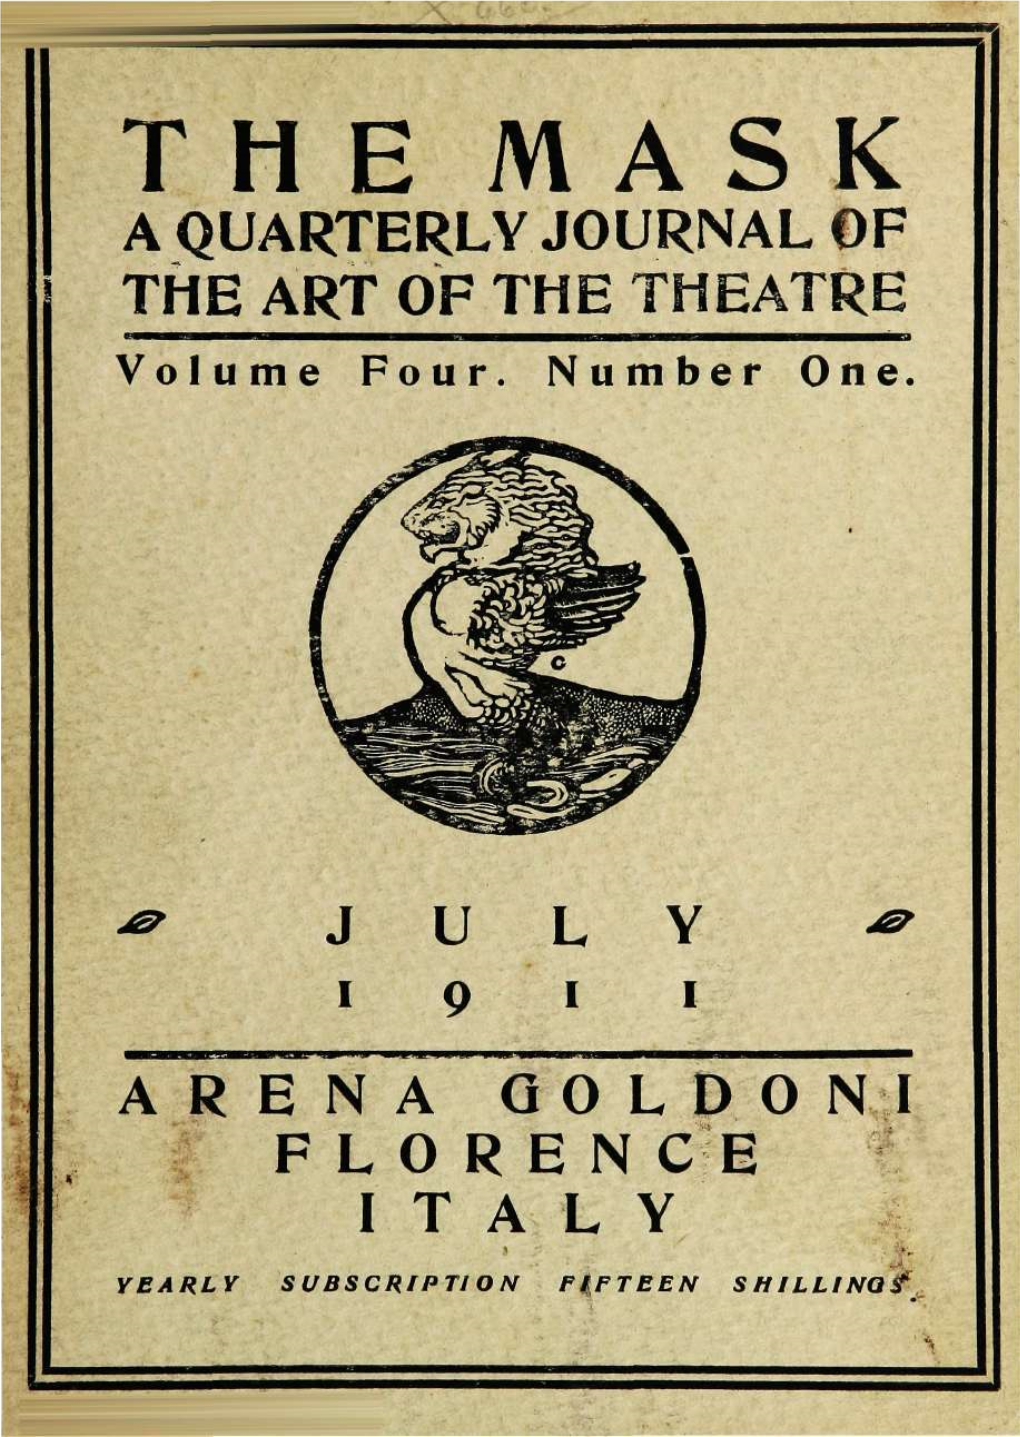 THE MASK a QUARTERLY JOURNAL of the ART of the THEATRE Volume Four